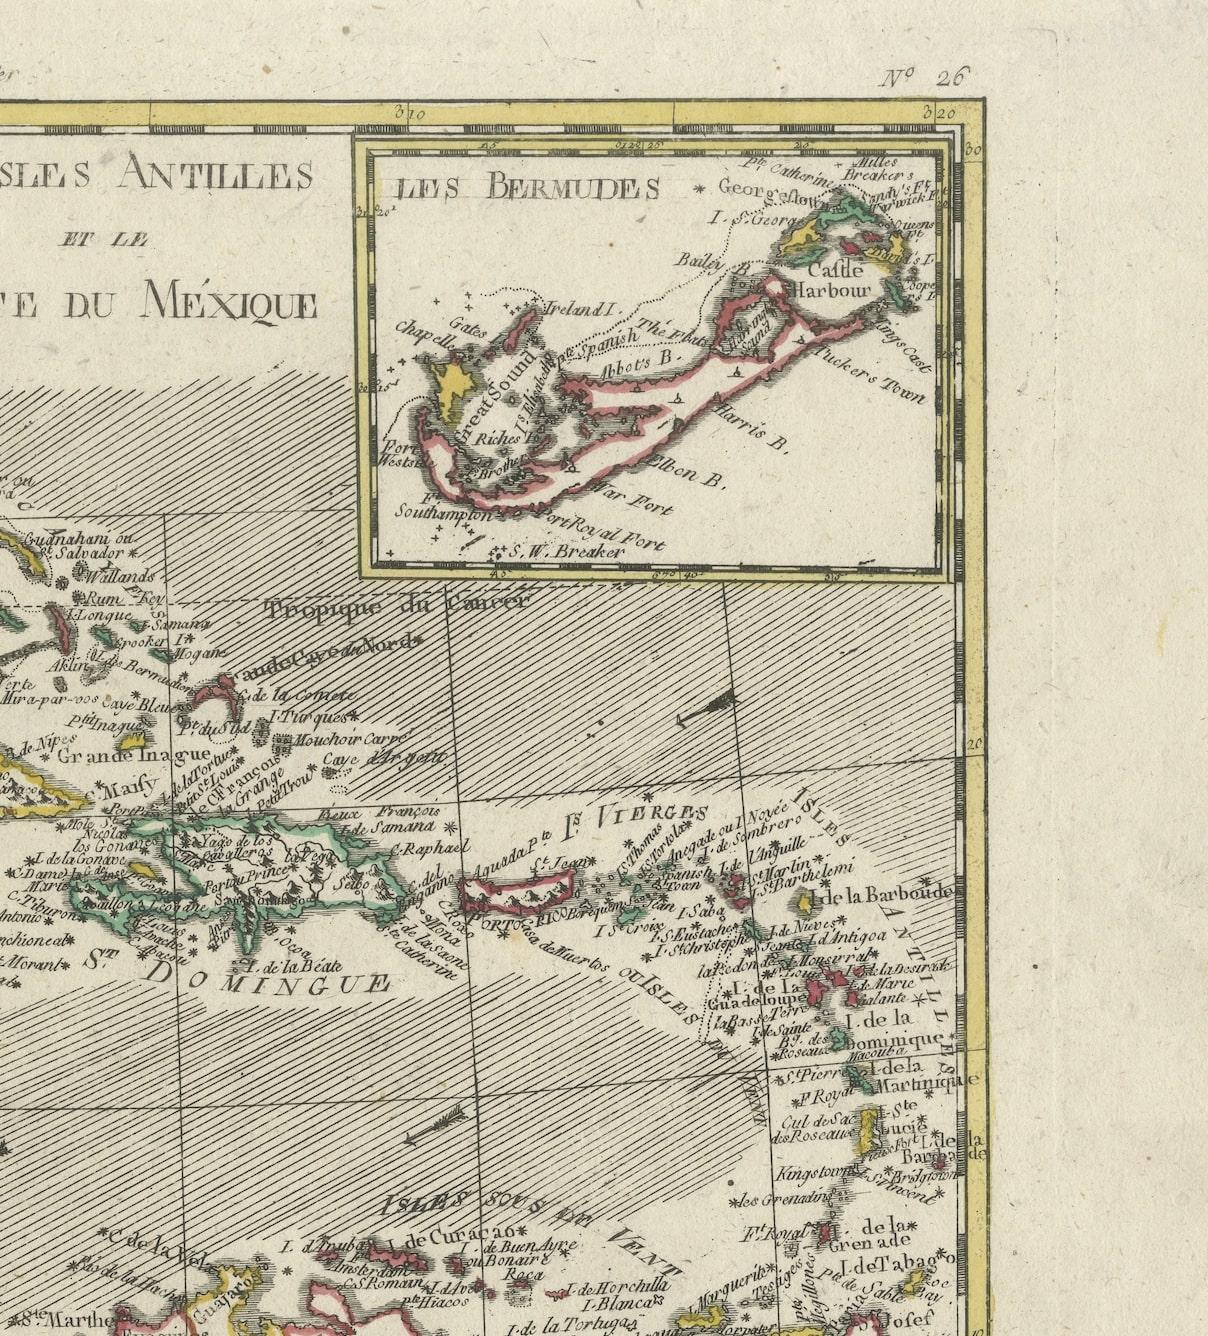 Engraved Original Engraving of the West Indies, Gulf of Mexico, Antilles, Caribbean, 1780 For Sale